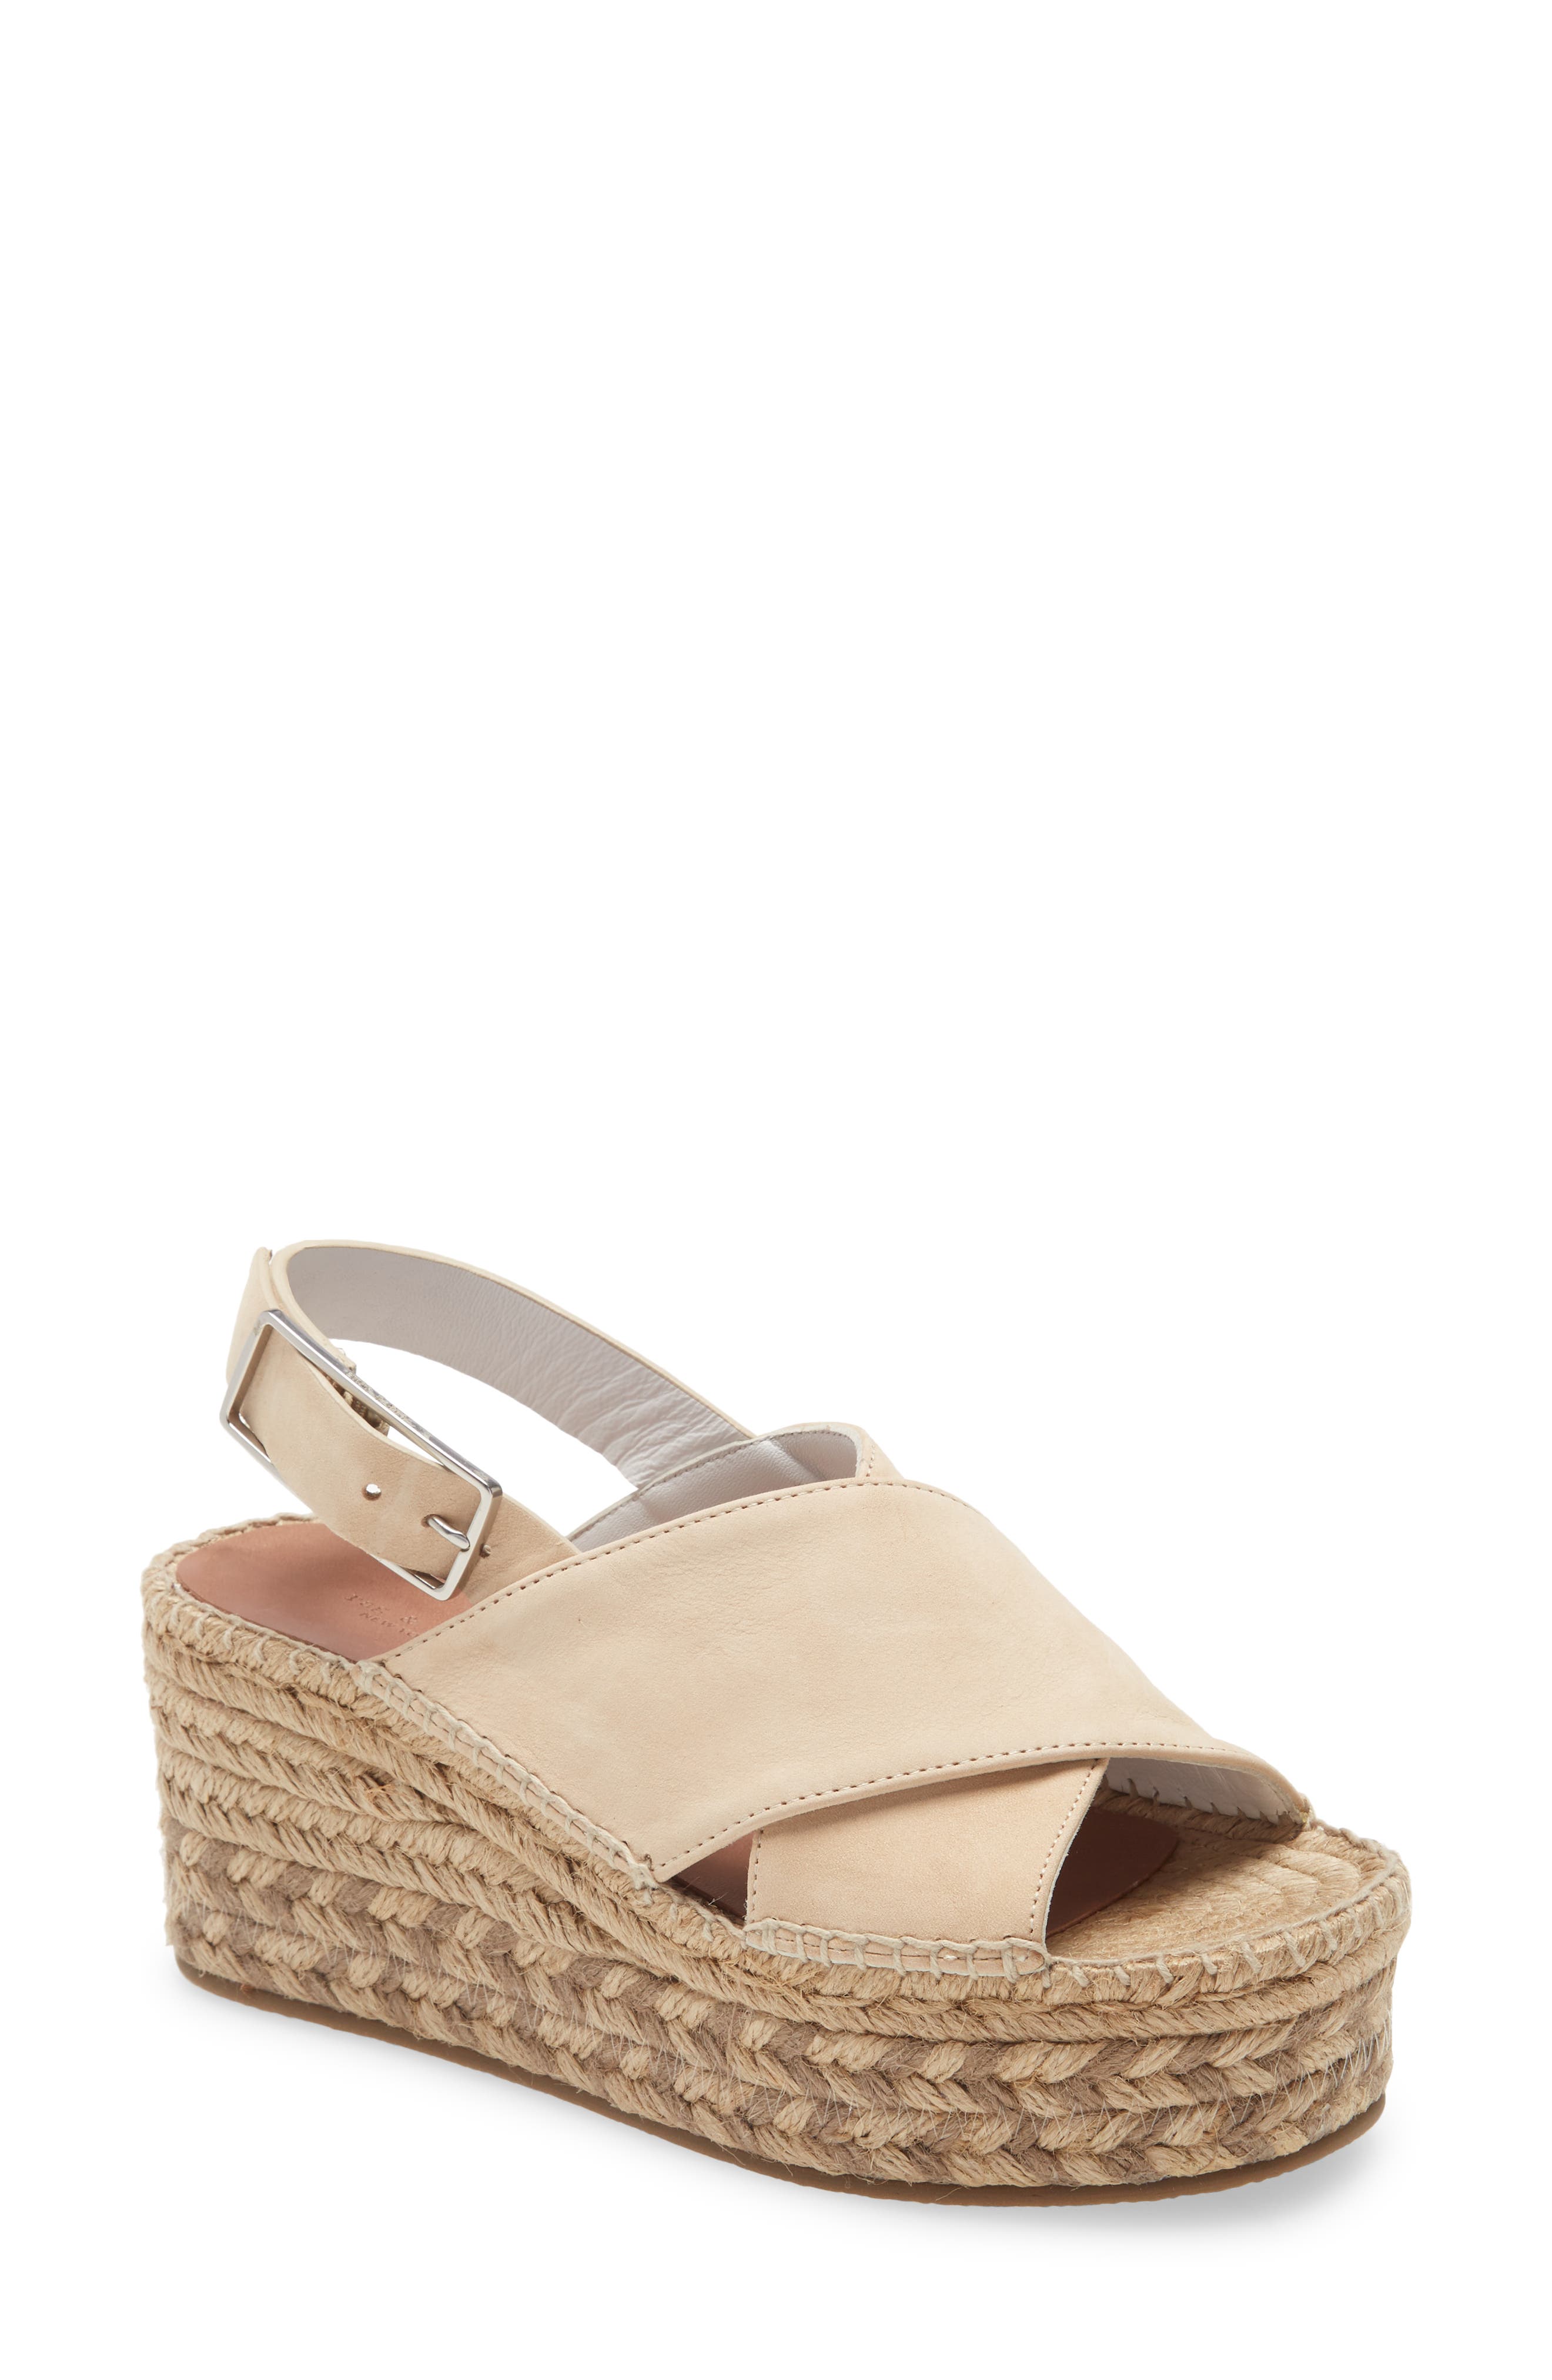 rag and bone shoes nordstrom